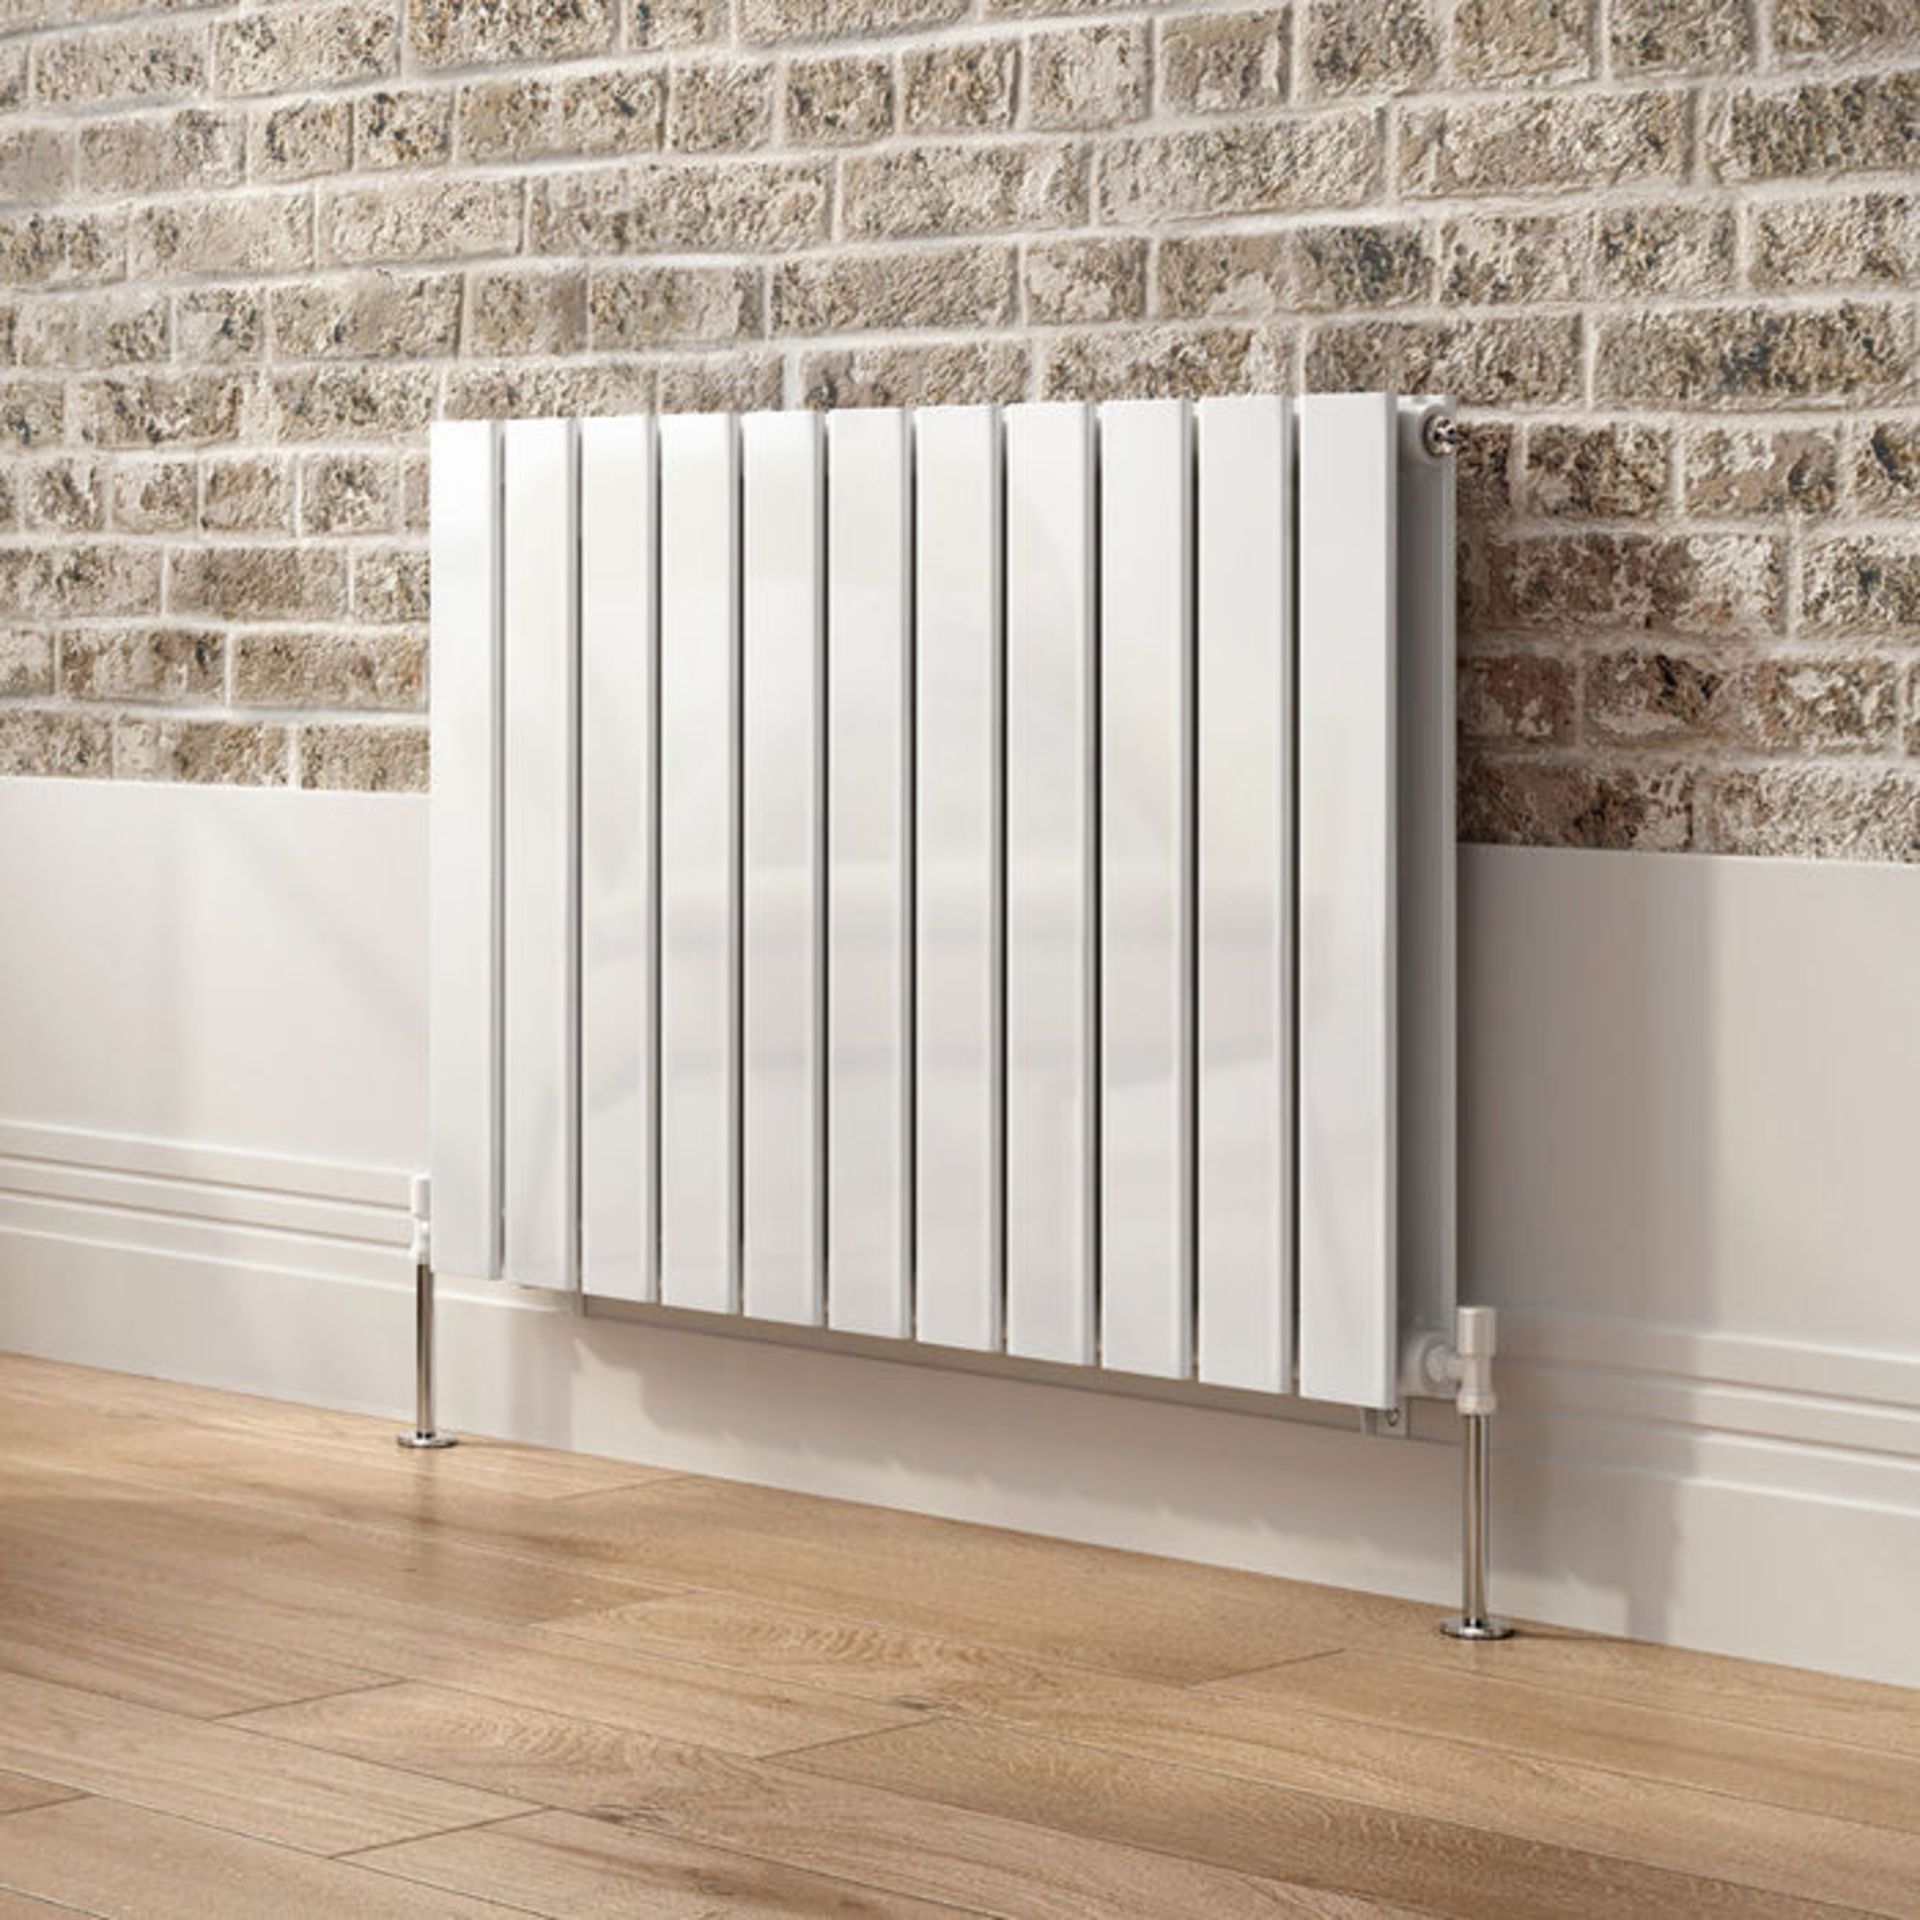 600x830mm Gloss White Double Flat Panel Horizontal Radiator. RC221. RRP £474.99. Made with hig... - Image 3 of 3